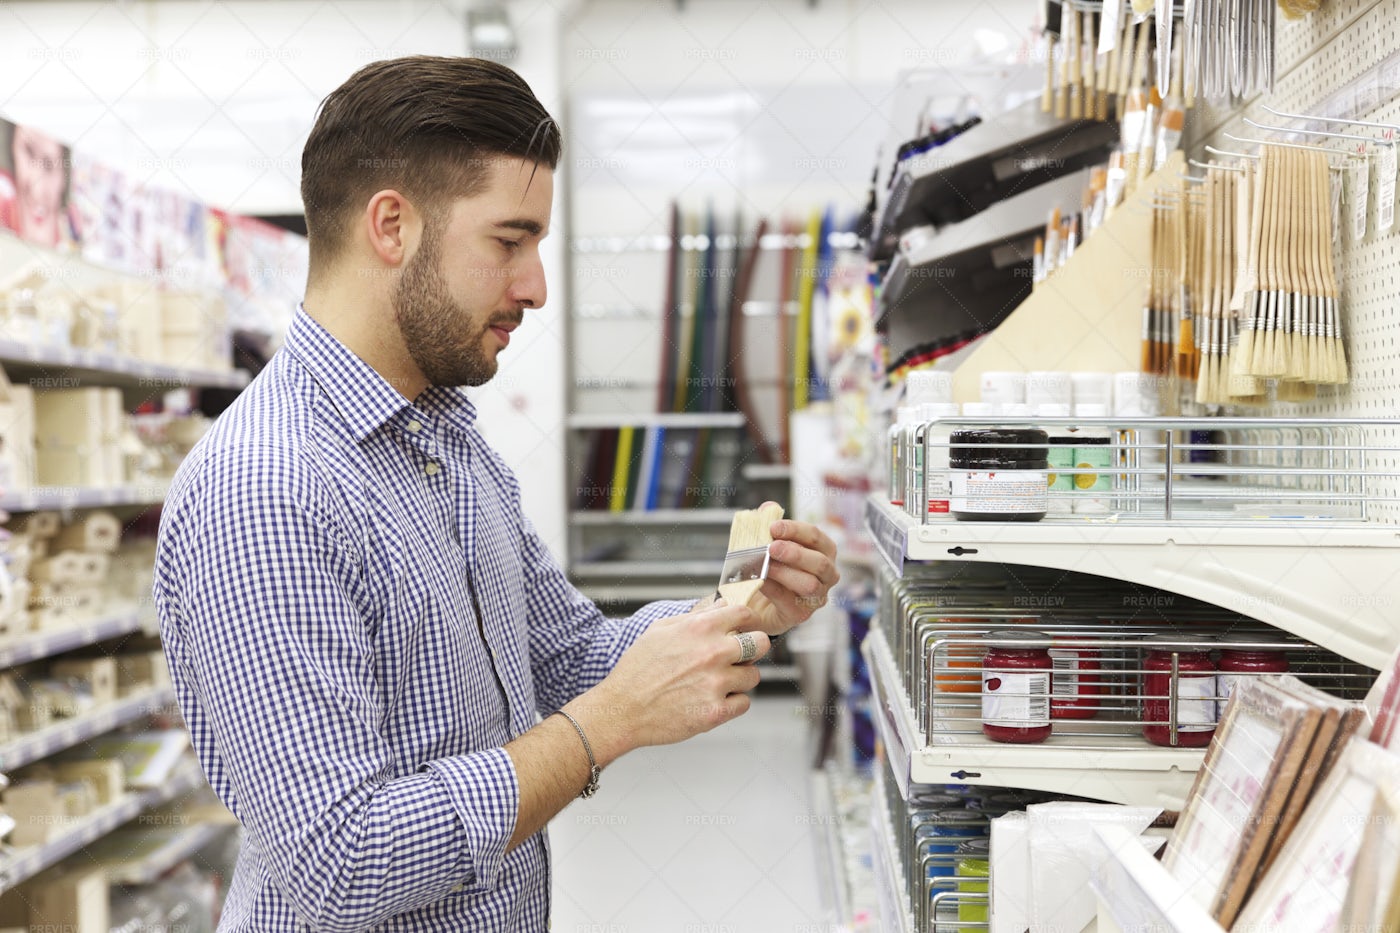 Buying Paint And Brushes: Stock Photos